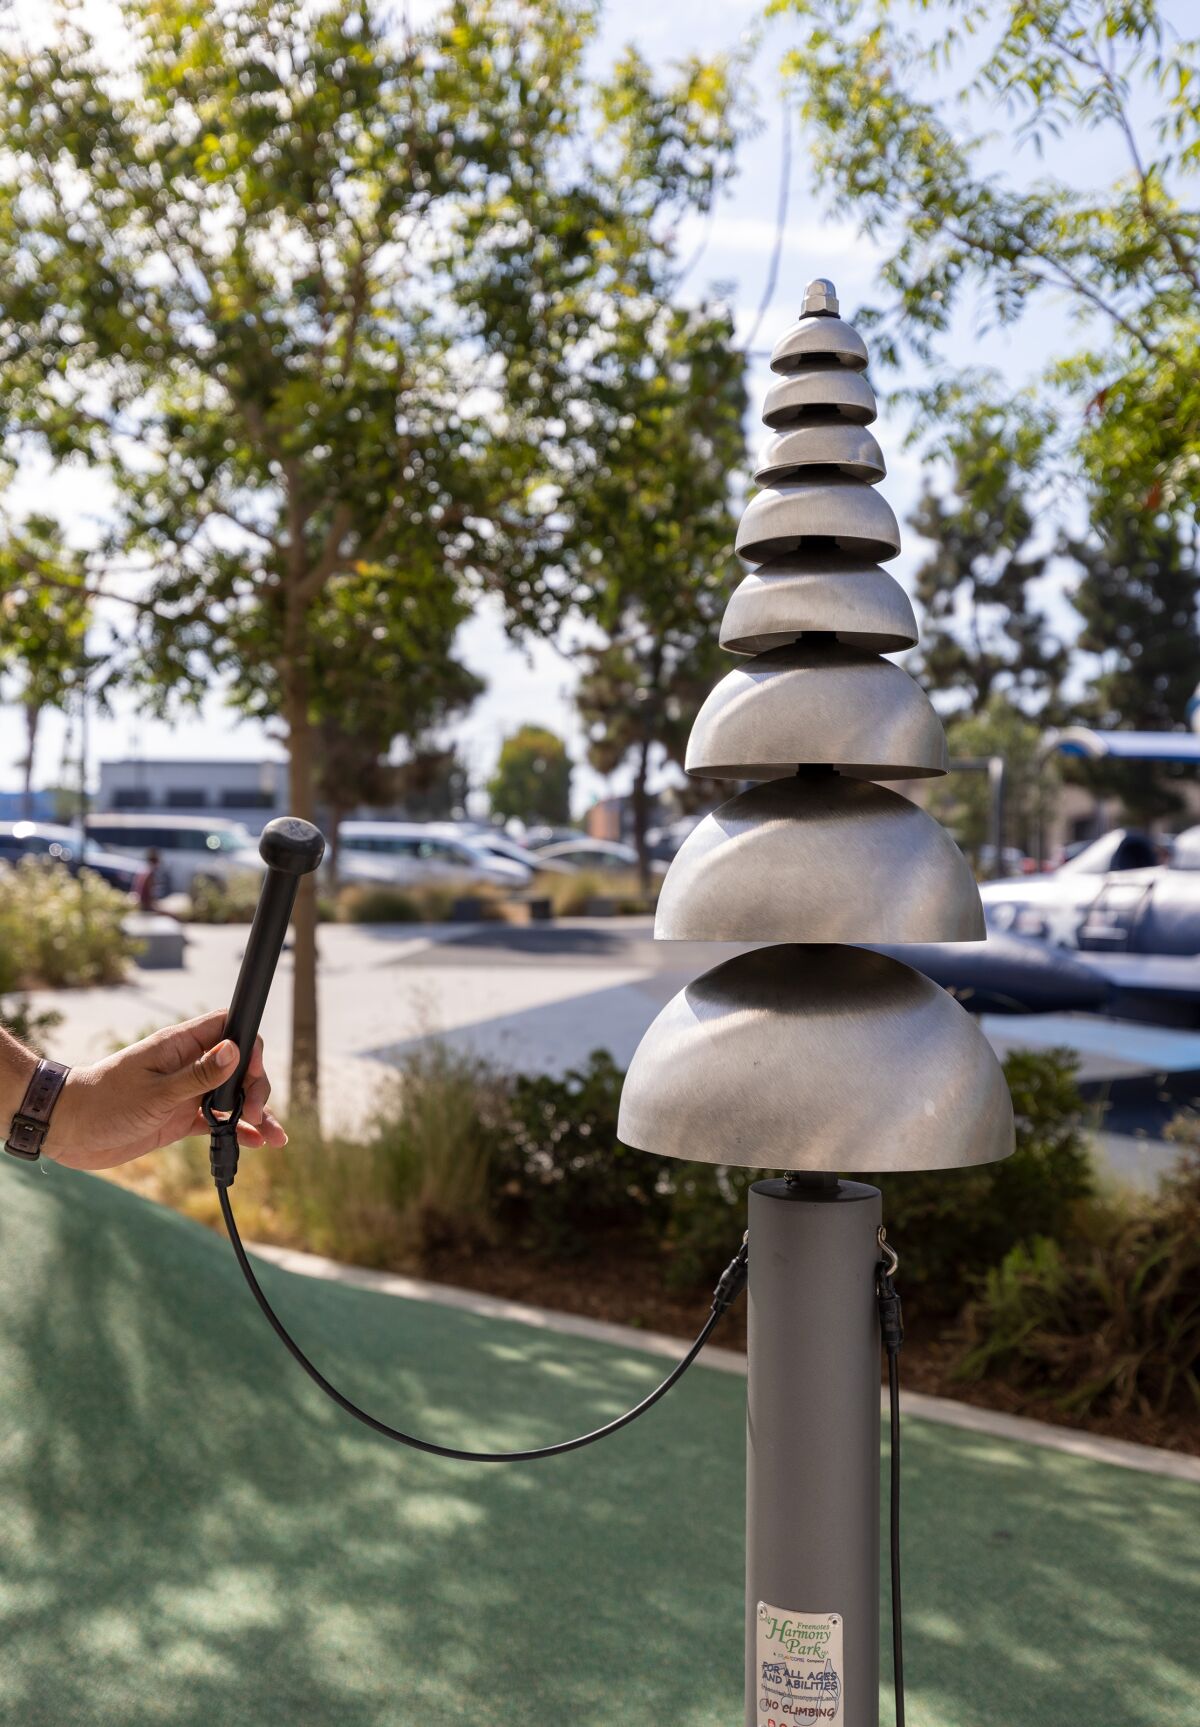 Pagoda bells are a part of a new outdoor musical instrument play area installed outside of the Donald Dungan Library.